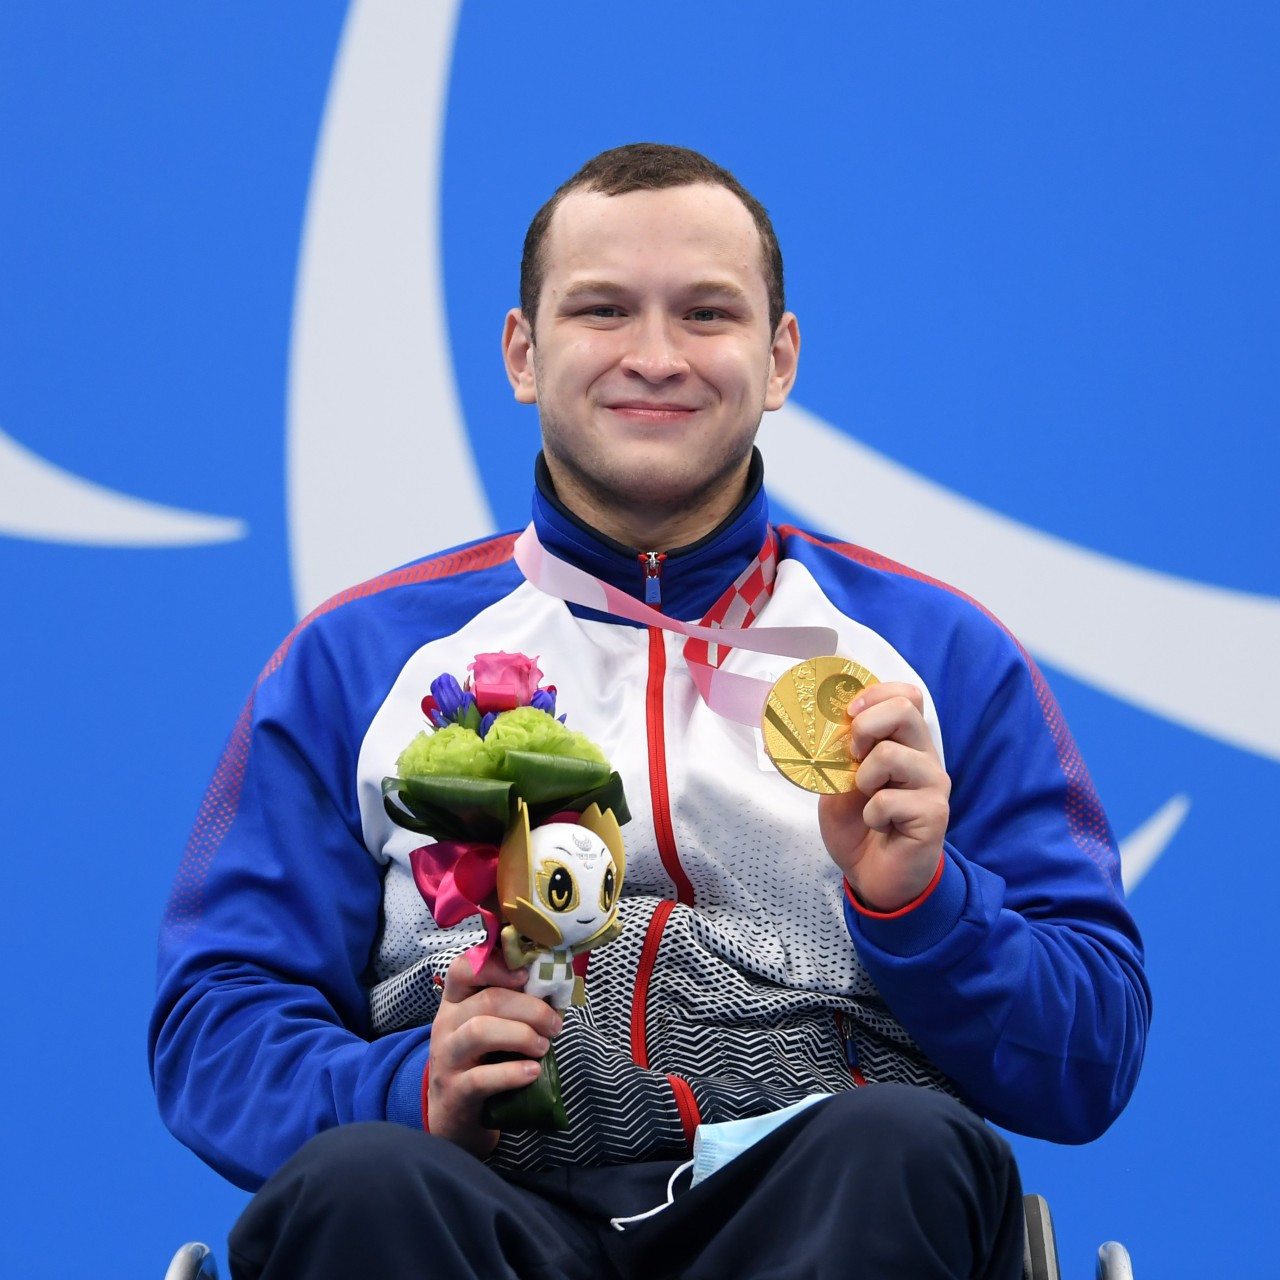 Dmitrii Cherniaev won 100 metres breaststroke SB4 gold at the Tokyo 2020 Paralympics ©Getty Images